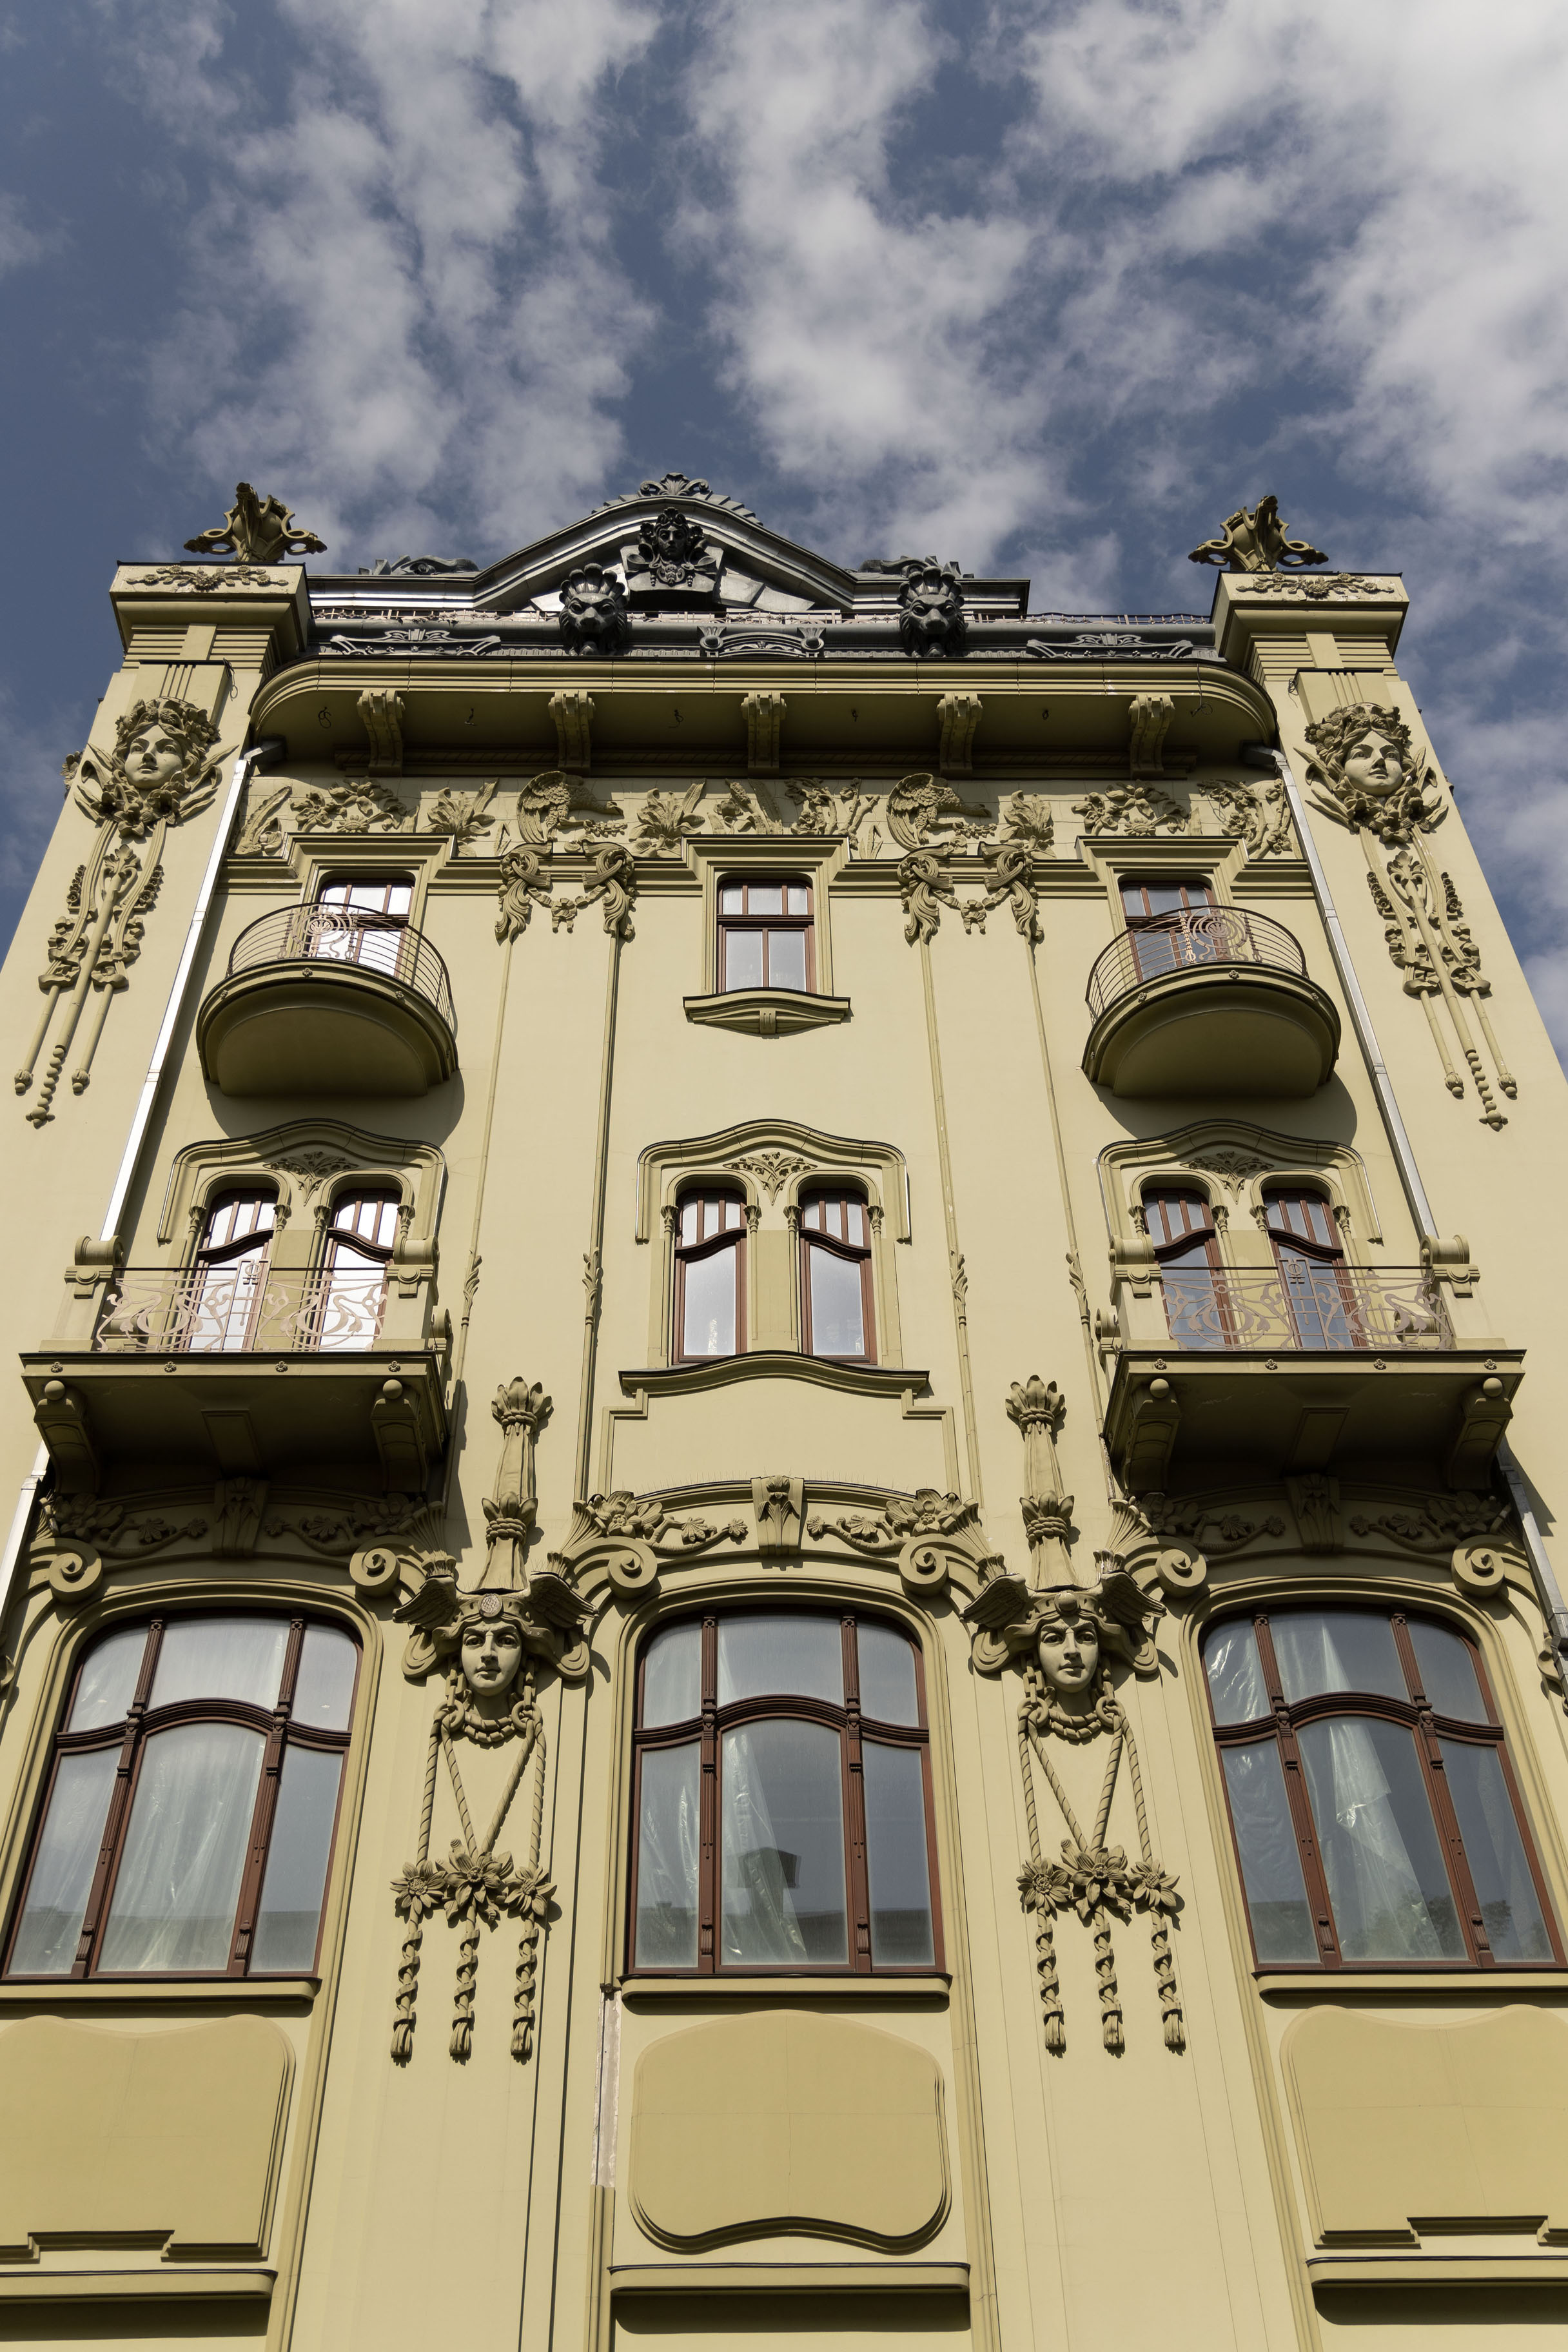 Looking up one of the many elegant buildings in Odesa | Impresiones de Odesa | Ucrania